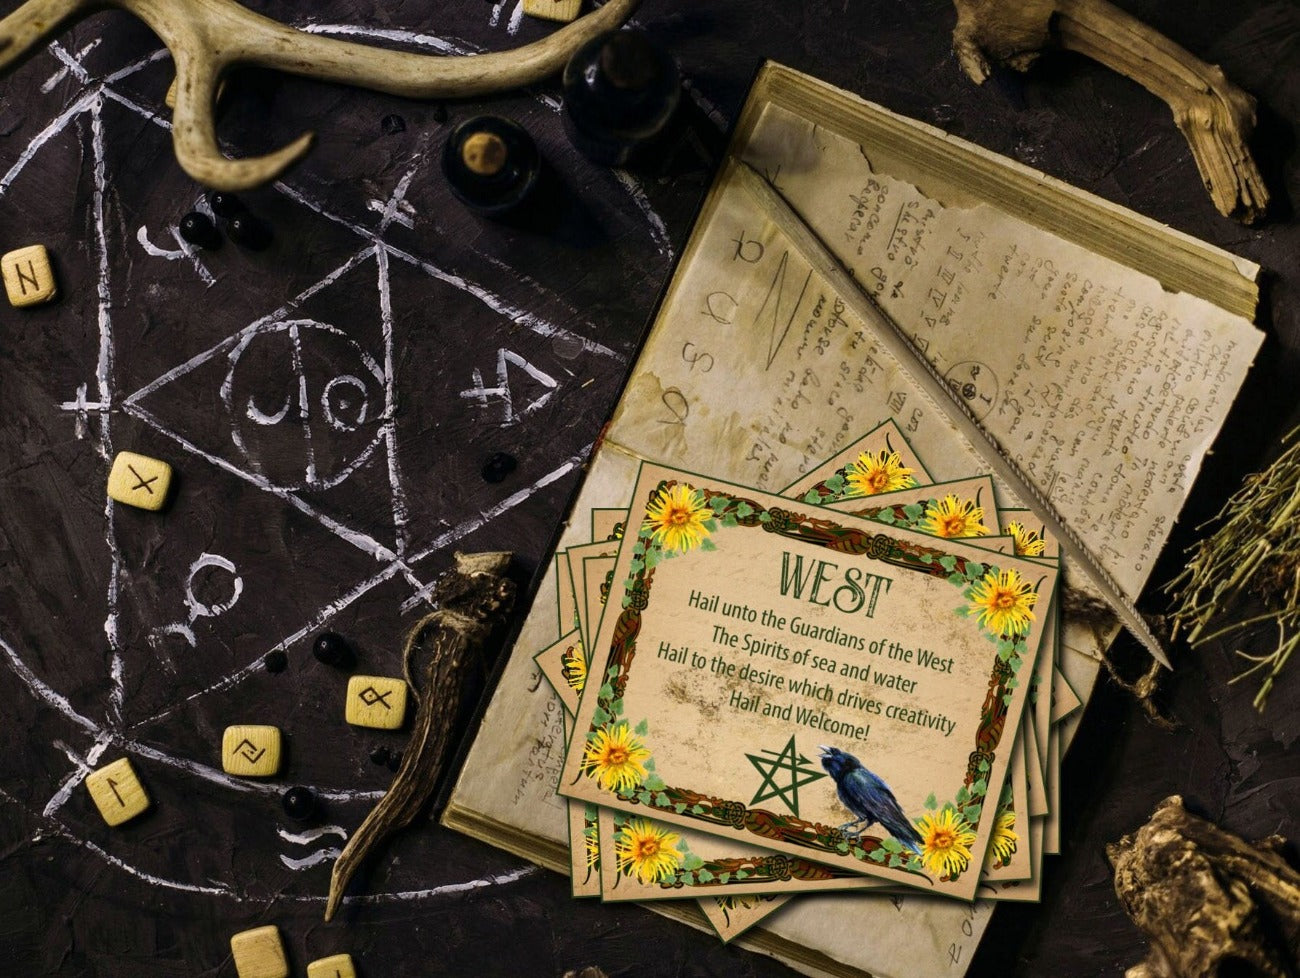 LUGHNASADH QUARTER CALLS 8 Printable Cards to Cast Magic Circle are place on an Altar with runes and a deer antler- Morgana Magick Spell